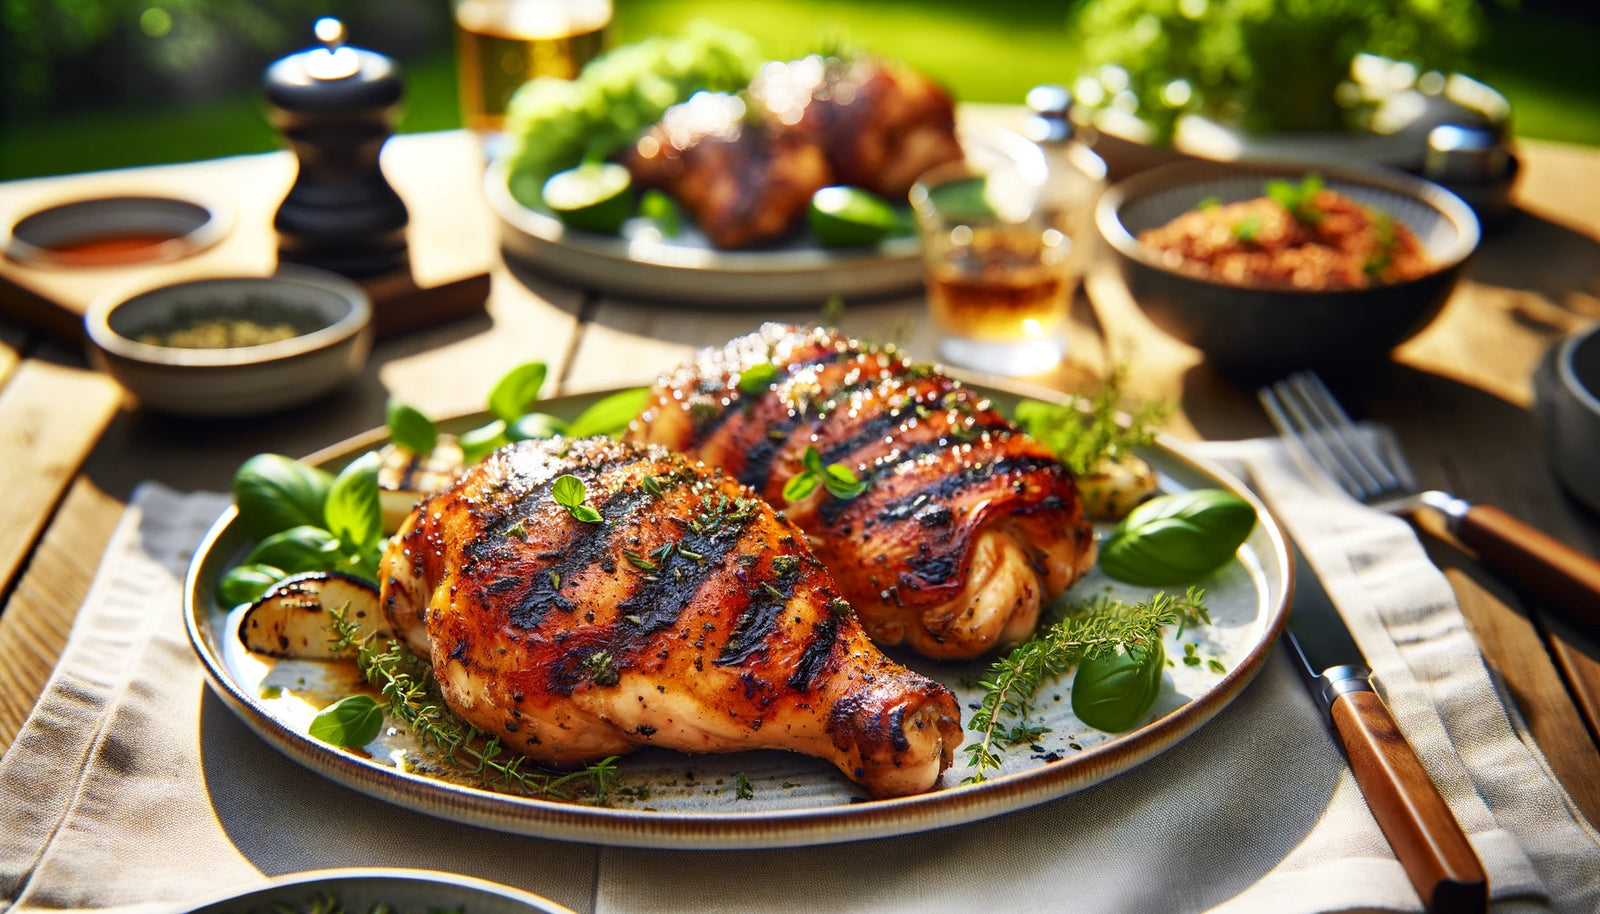 Easy Grilled Boneless Chicken Thigh Recipe with Smokehouse Maple Seasoning on the Arteflame Grill